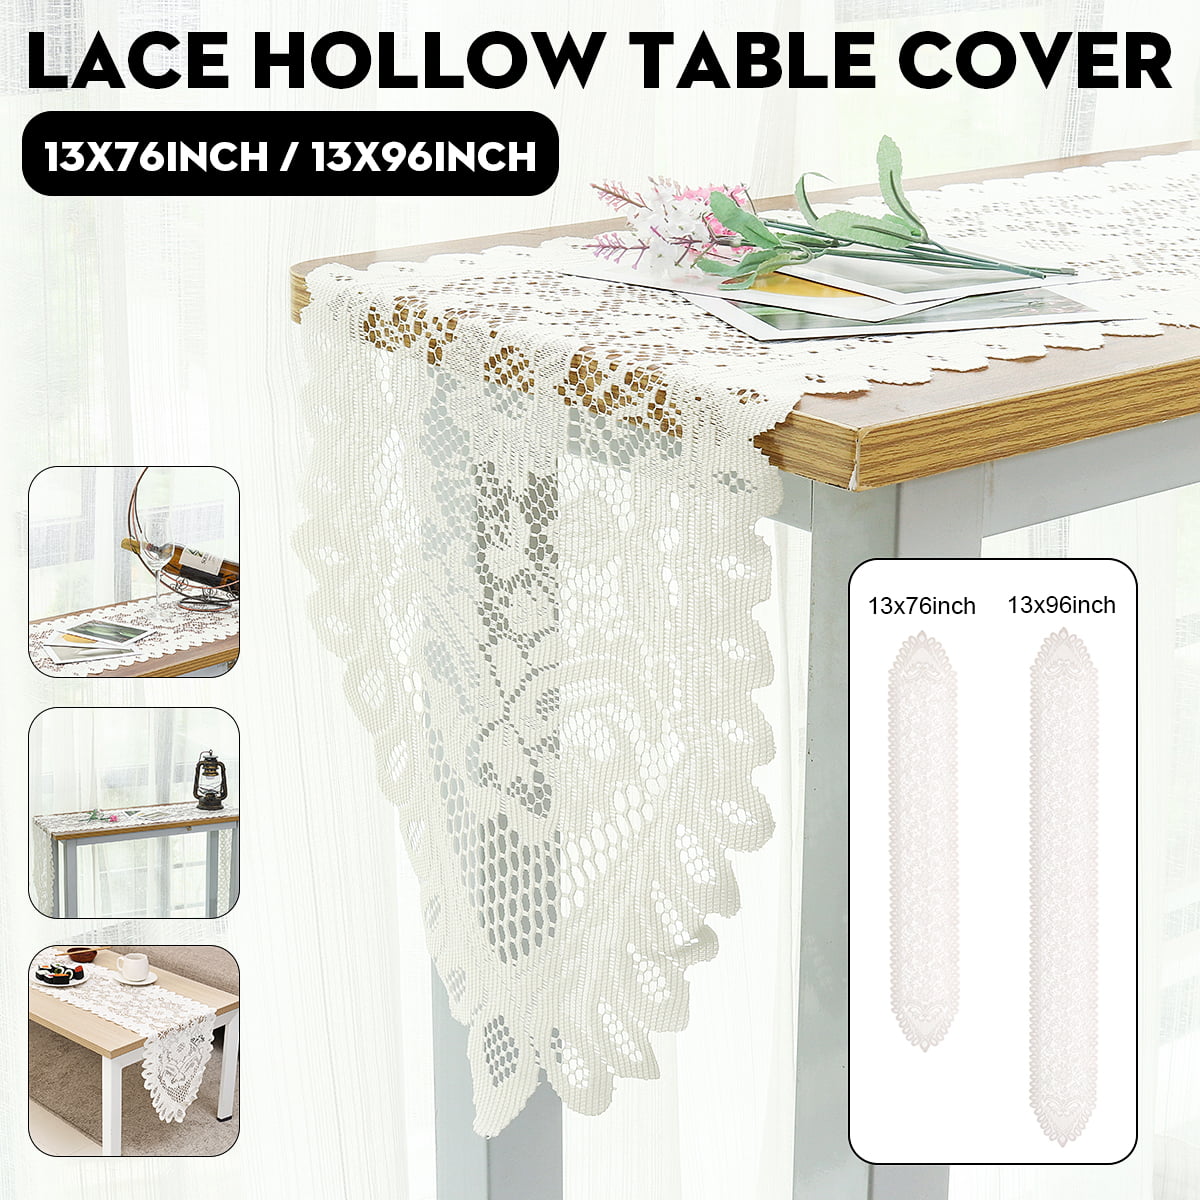 Vintage Handmade Table Runner Crochet Hollow Lace Cotton Party Wedding Cover 